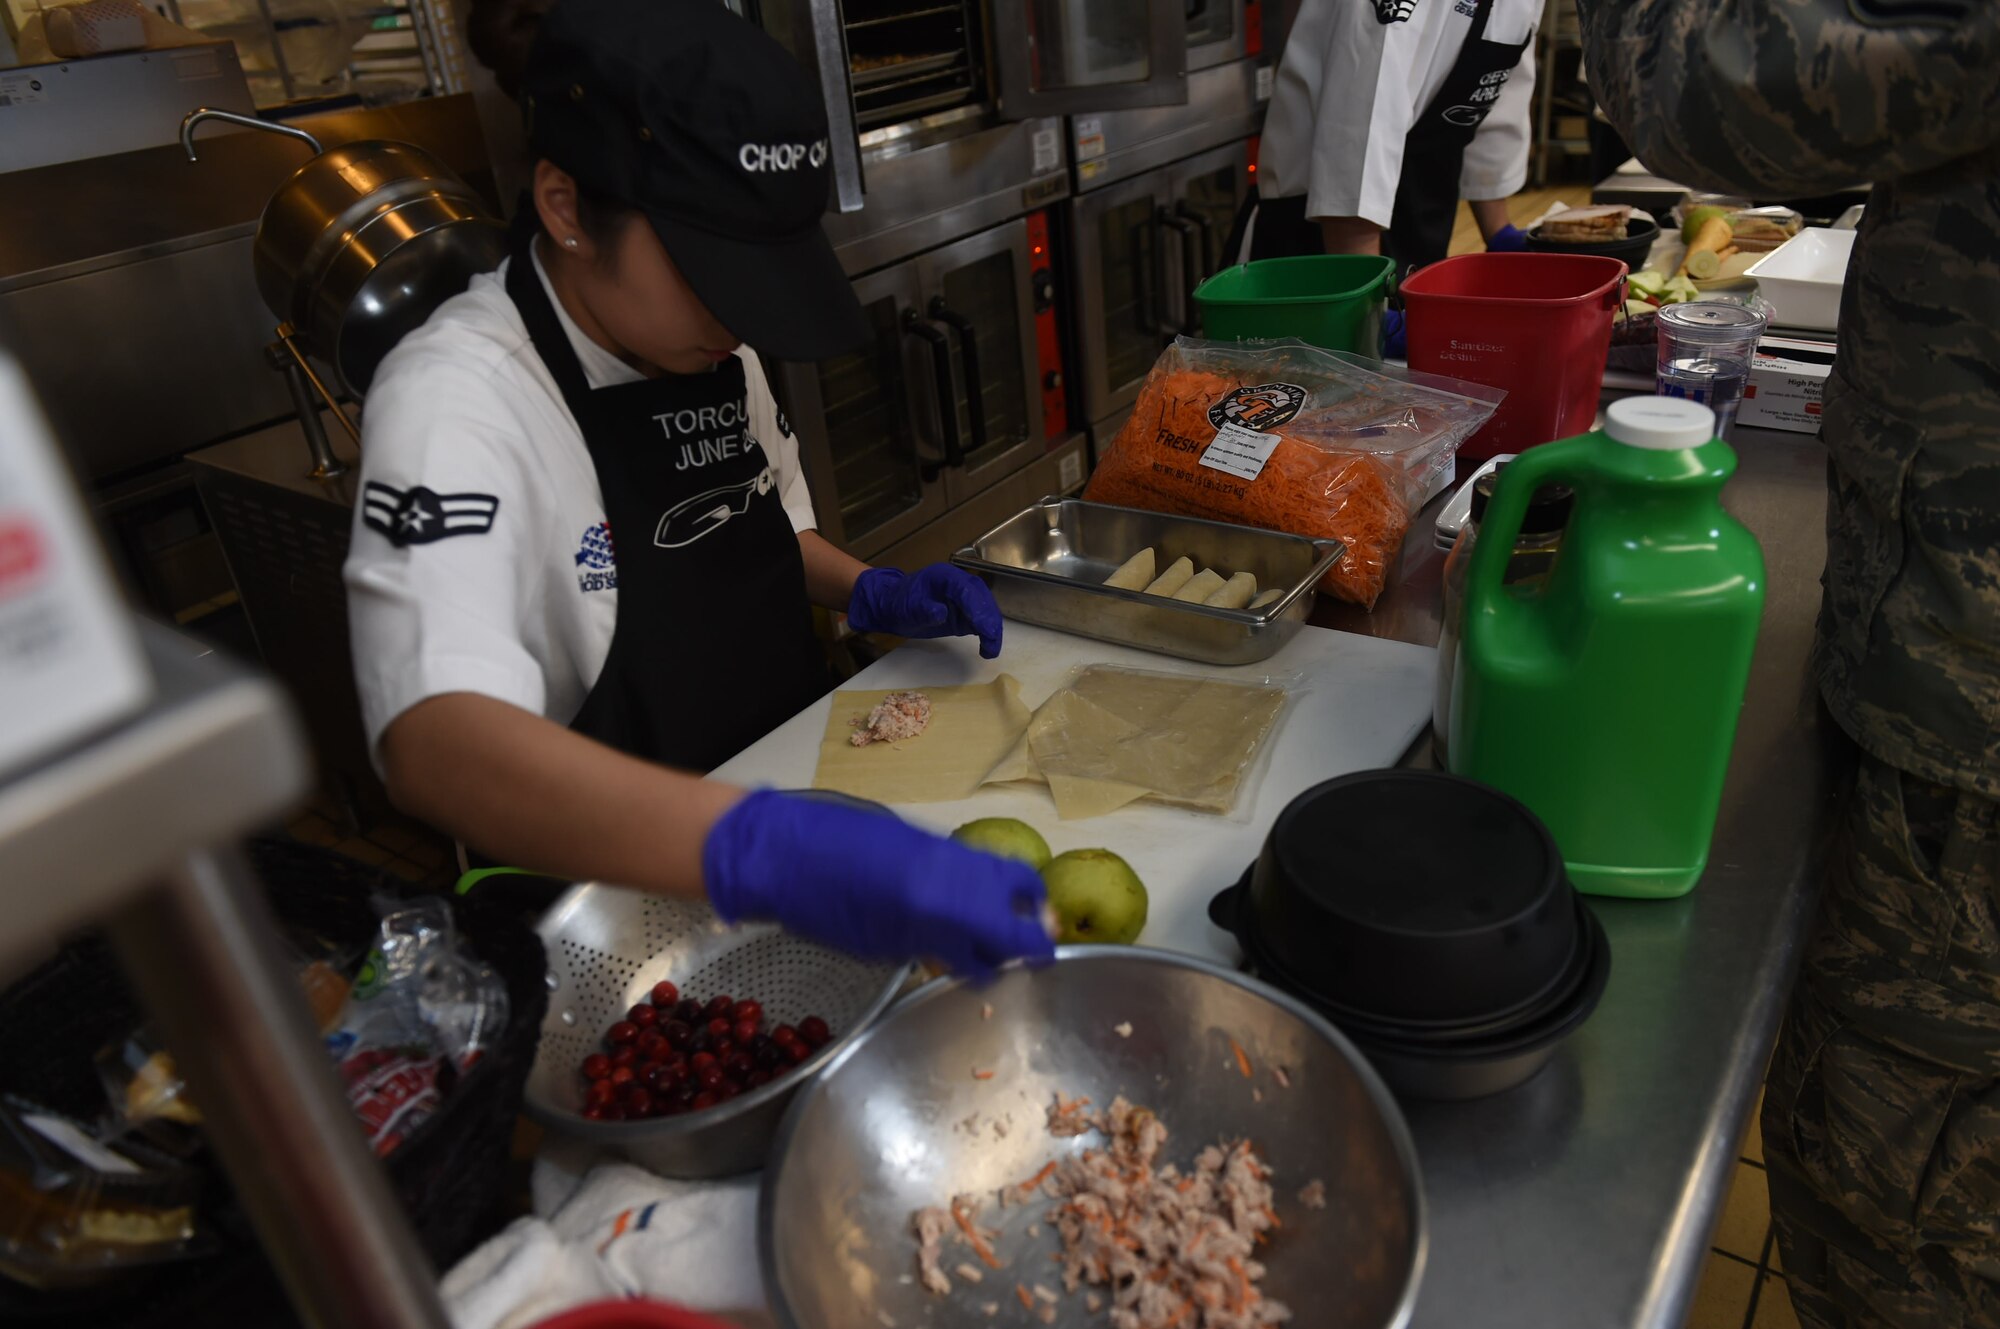 U.S. Air Force Airman 1st Class Michelle Vi Torculas, a food services specialist assigned to the 97th Force Support Squadron, prepares her dish that she will give to the judges for the 2017 Chopped Chef Challenge, November 28, 2017, at Altus Air Force Base, Okla. The competitors were given a basket containing six random ingredients to create a three-course meal within two hours. Torculas won the region two 2018 Arthur J. Myers Food Service Excellence Award for her hard work in events like this and in her career. (U.S. Air Force photo by Senior Airman Kirby Turbak)